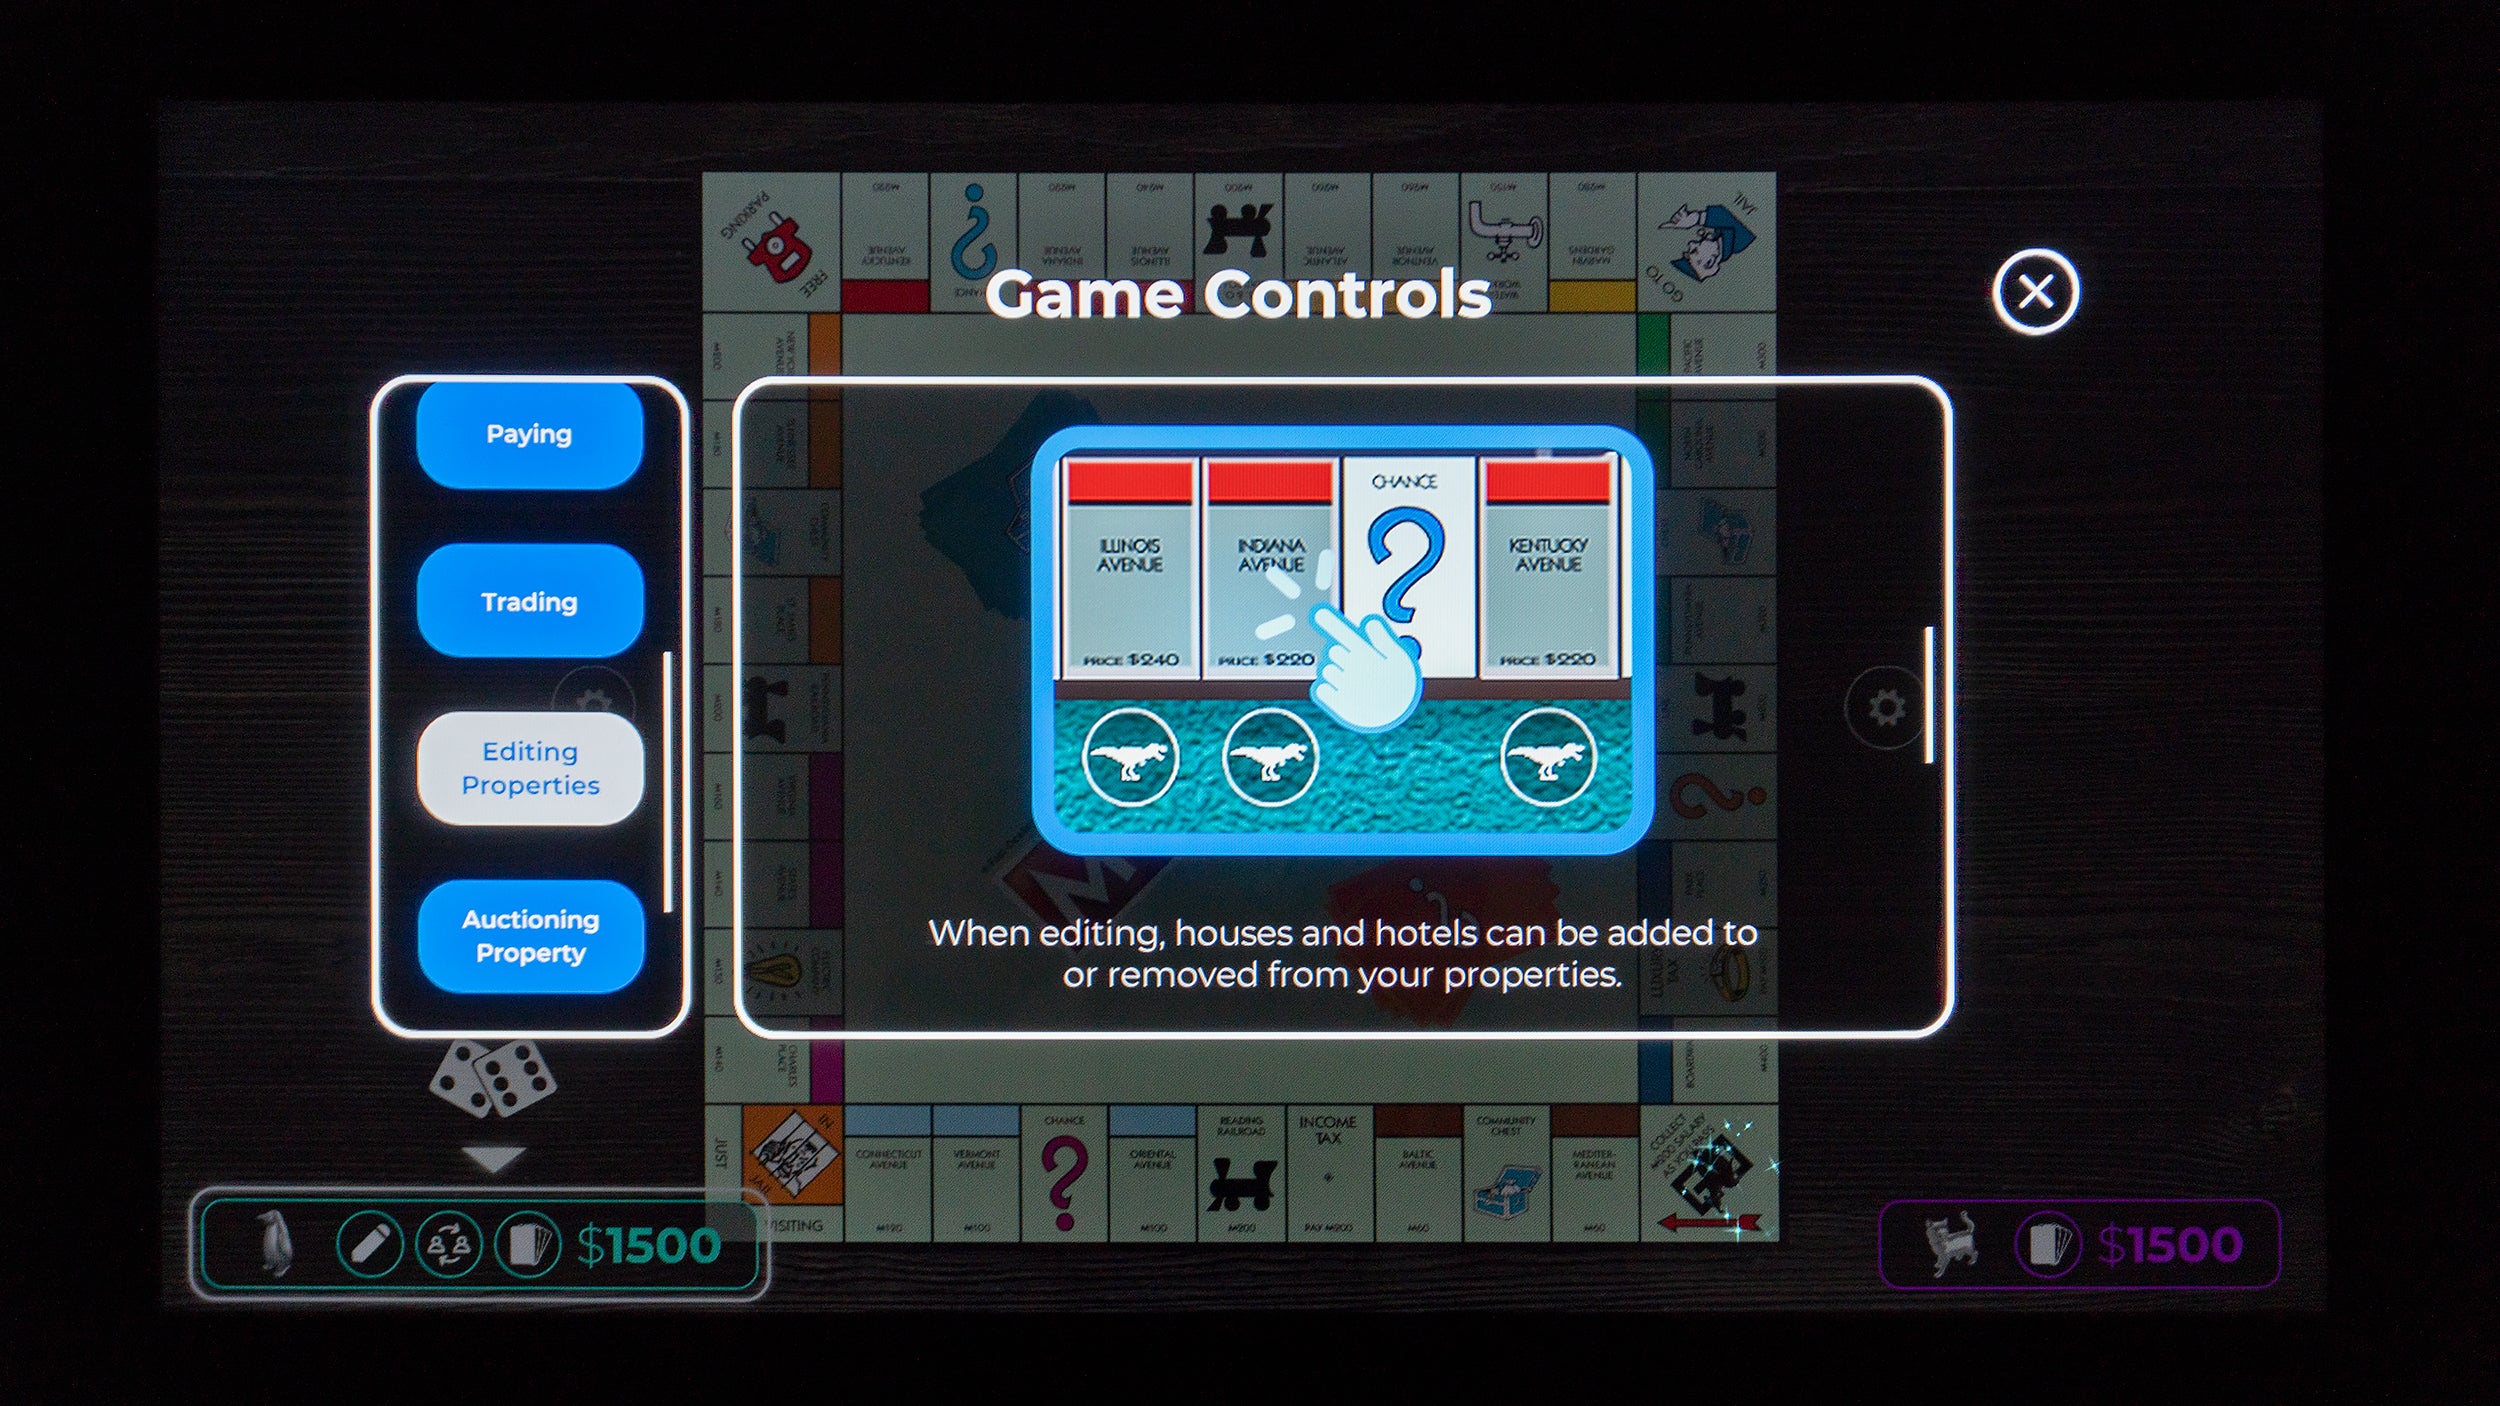 Each game includes its own settings menu with game instructions, explanations on how the touchscreen controls work, and even alternate rules and gameplay for those who like to customise games like Monopoly. (Photo: Andrew Liszewski - Gizmodo)